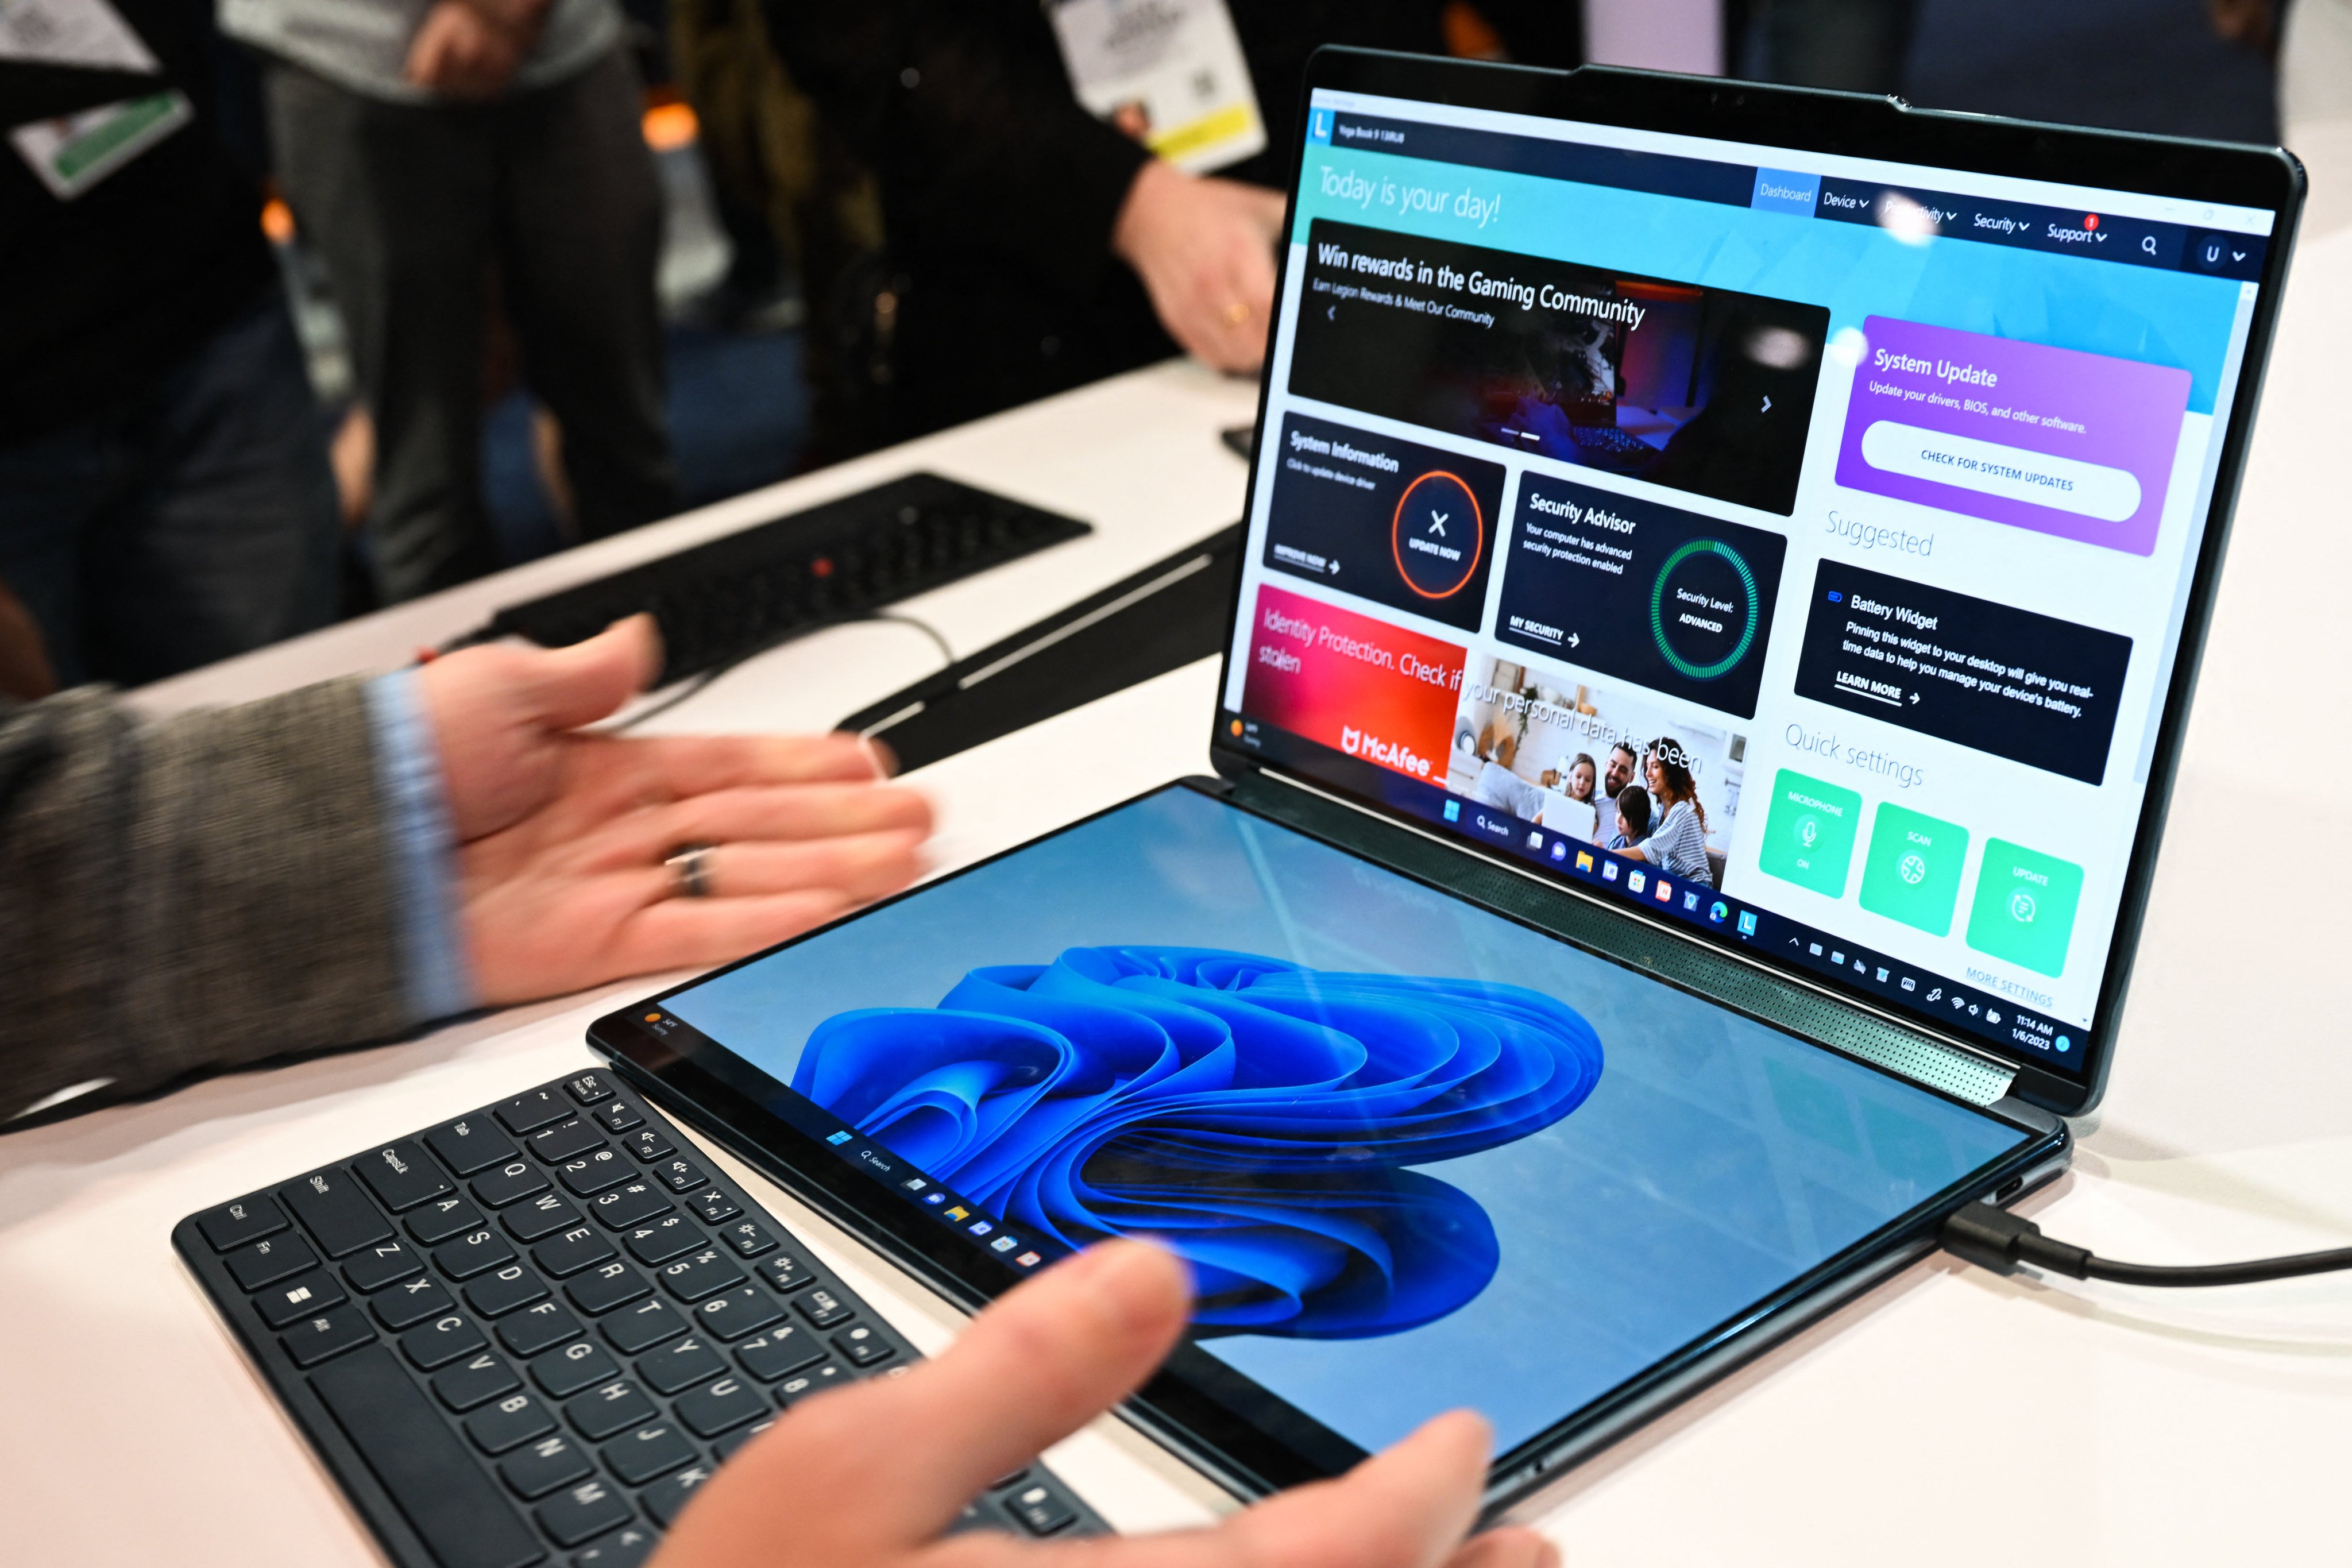 A Lenovo Yoga Book 9i dual-screen laptop on display at the Microsoft booth during the Consumer Electronics Show (CES) in Las Vegas, on January 6, 2023. Photo: AFP